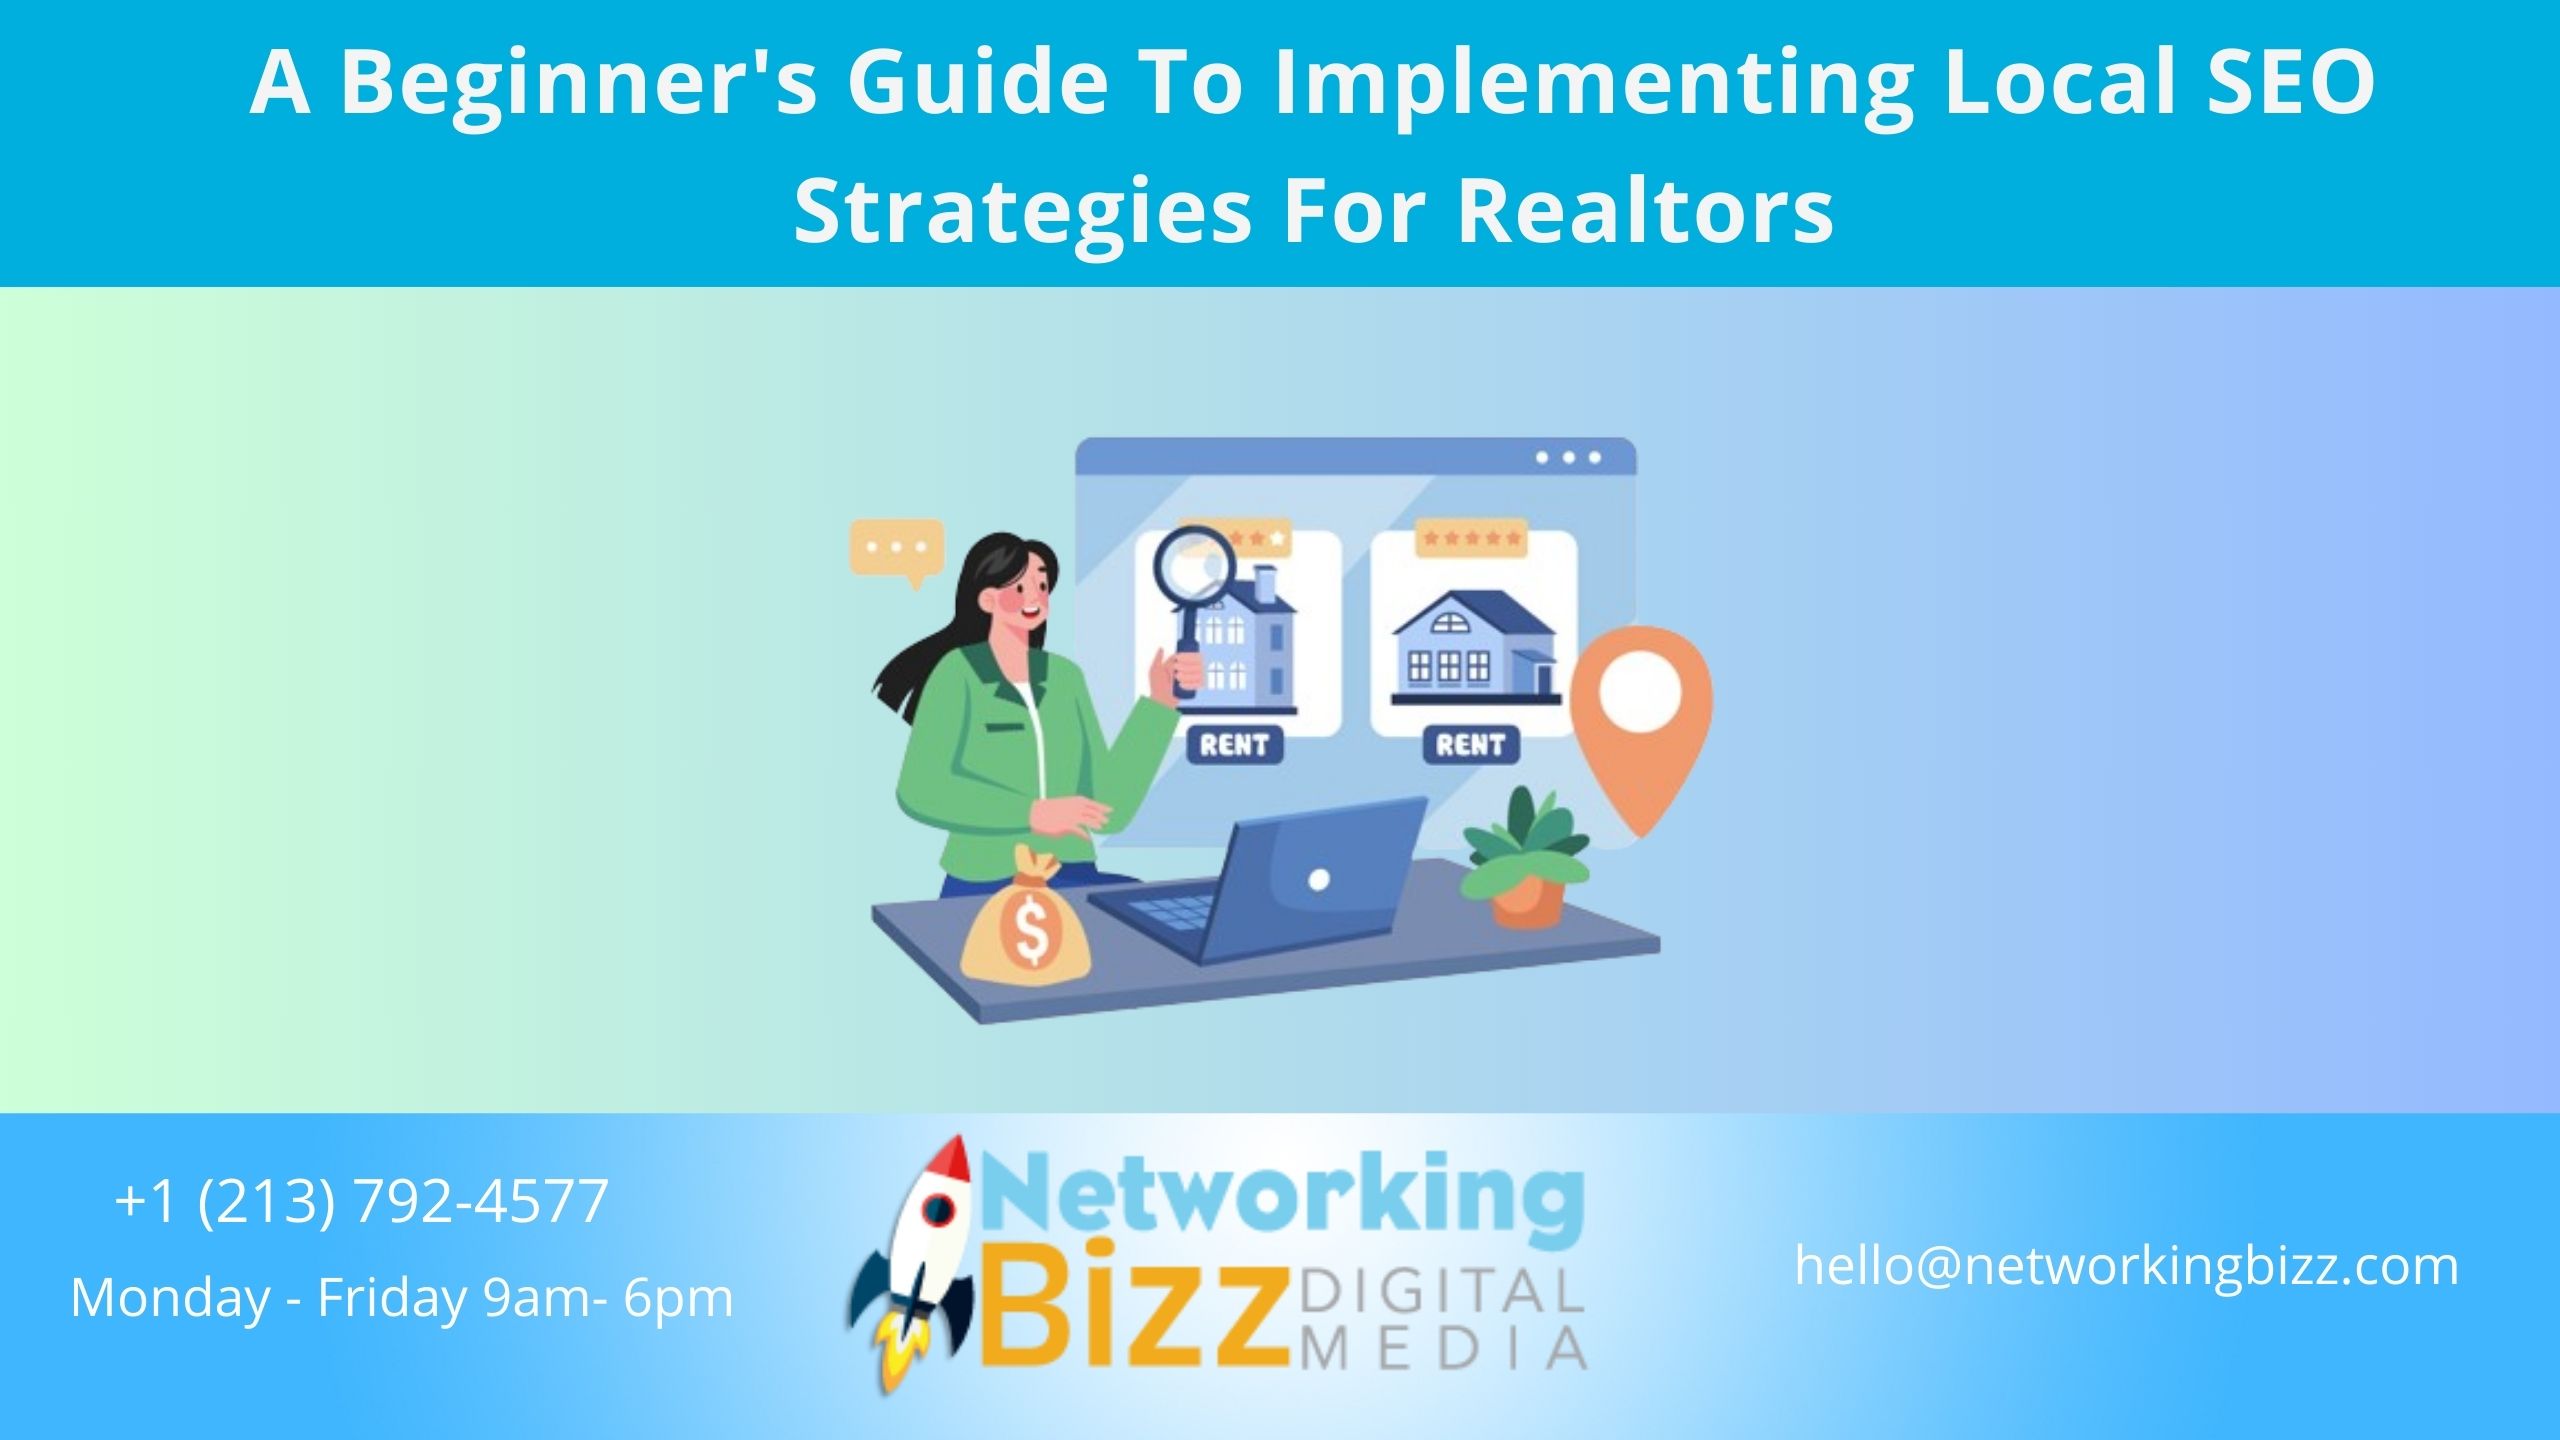 A Beginner’s Guide To Implementing Local SEO Strategies For Realtors